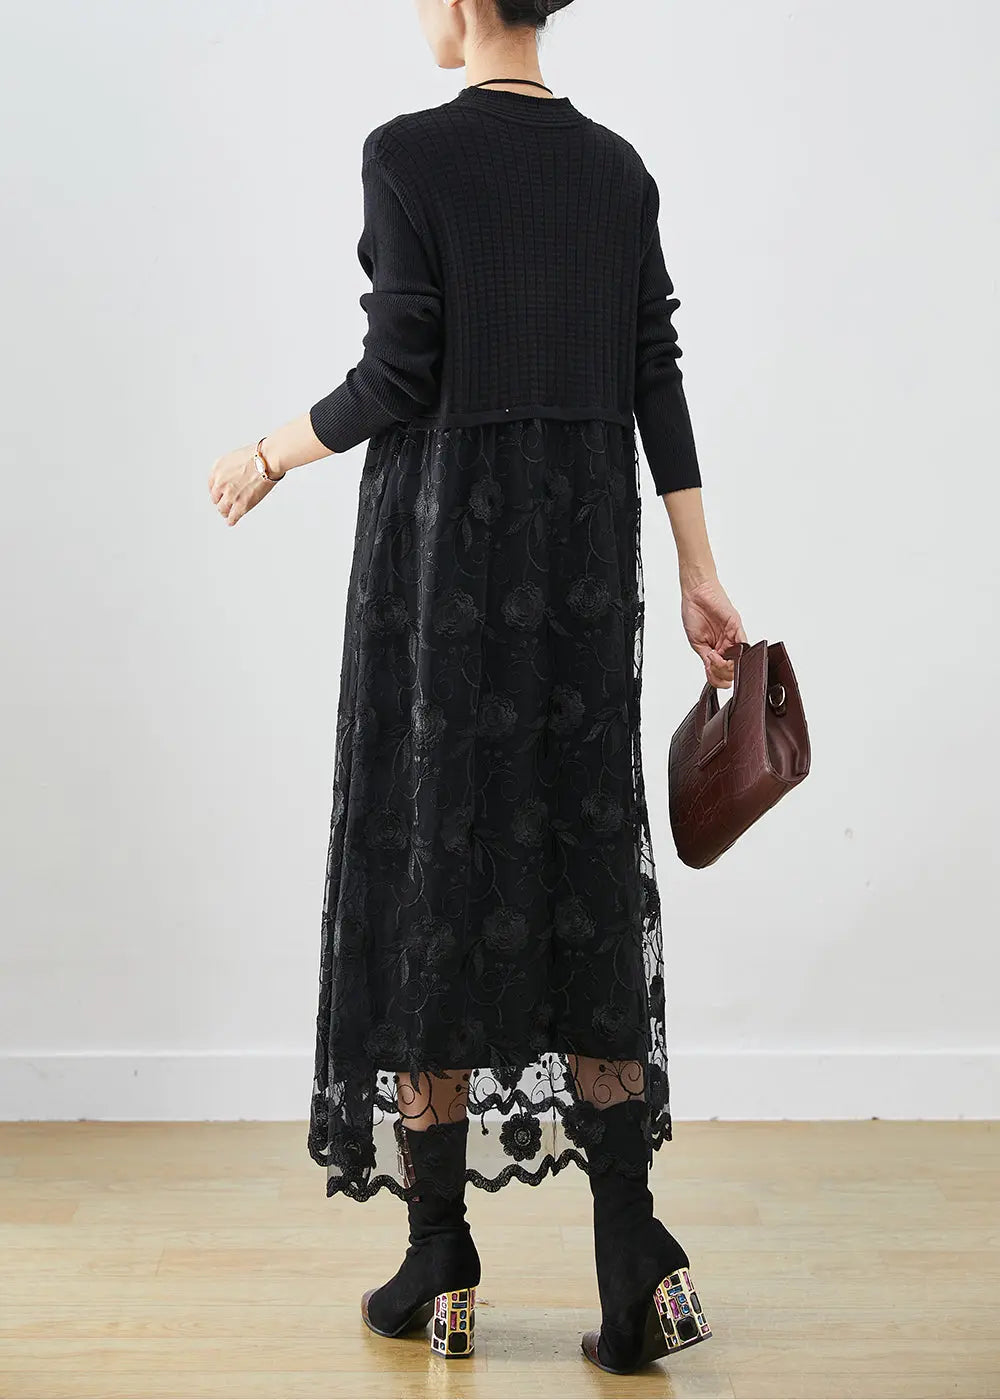 Black Patchwork Tulle Knit Holiday Dress Embroideried Fall Ada Fashion